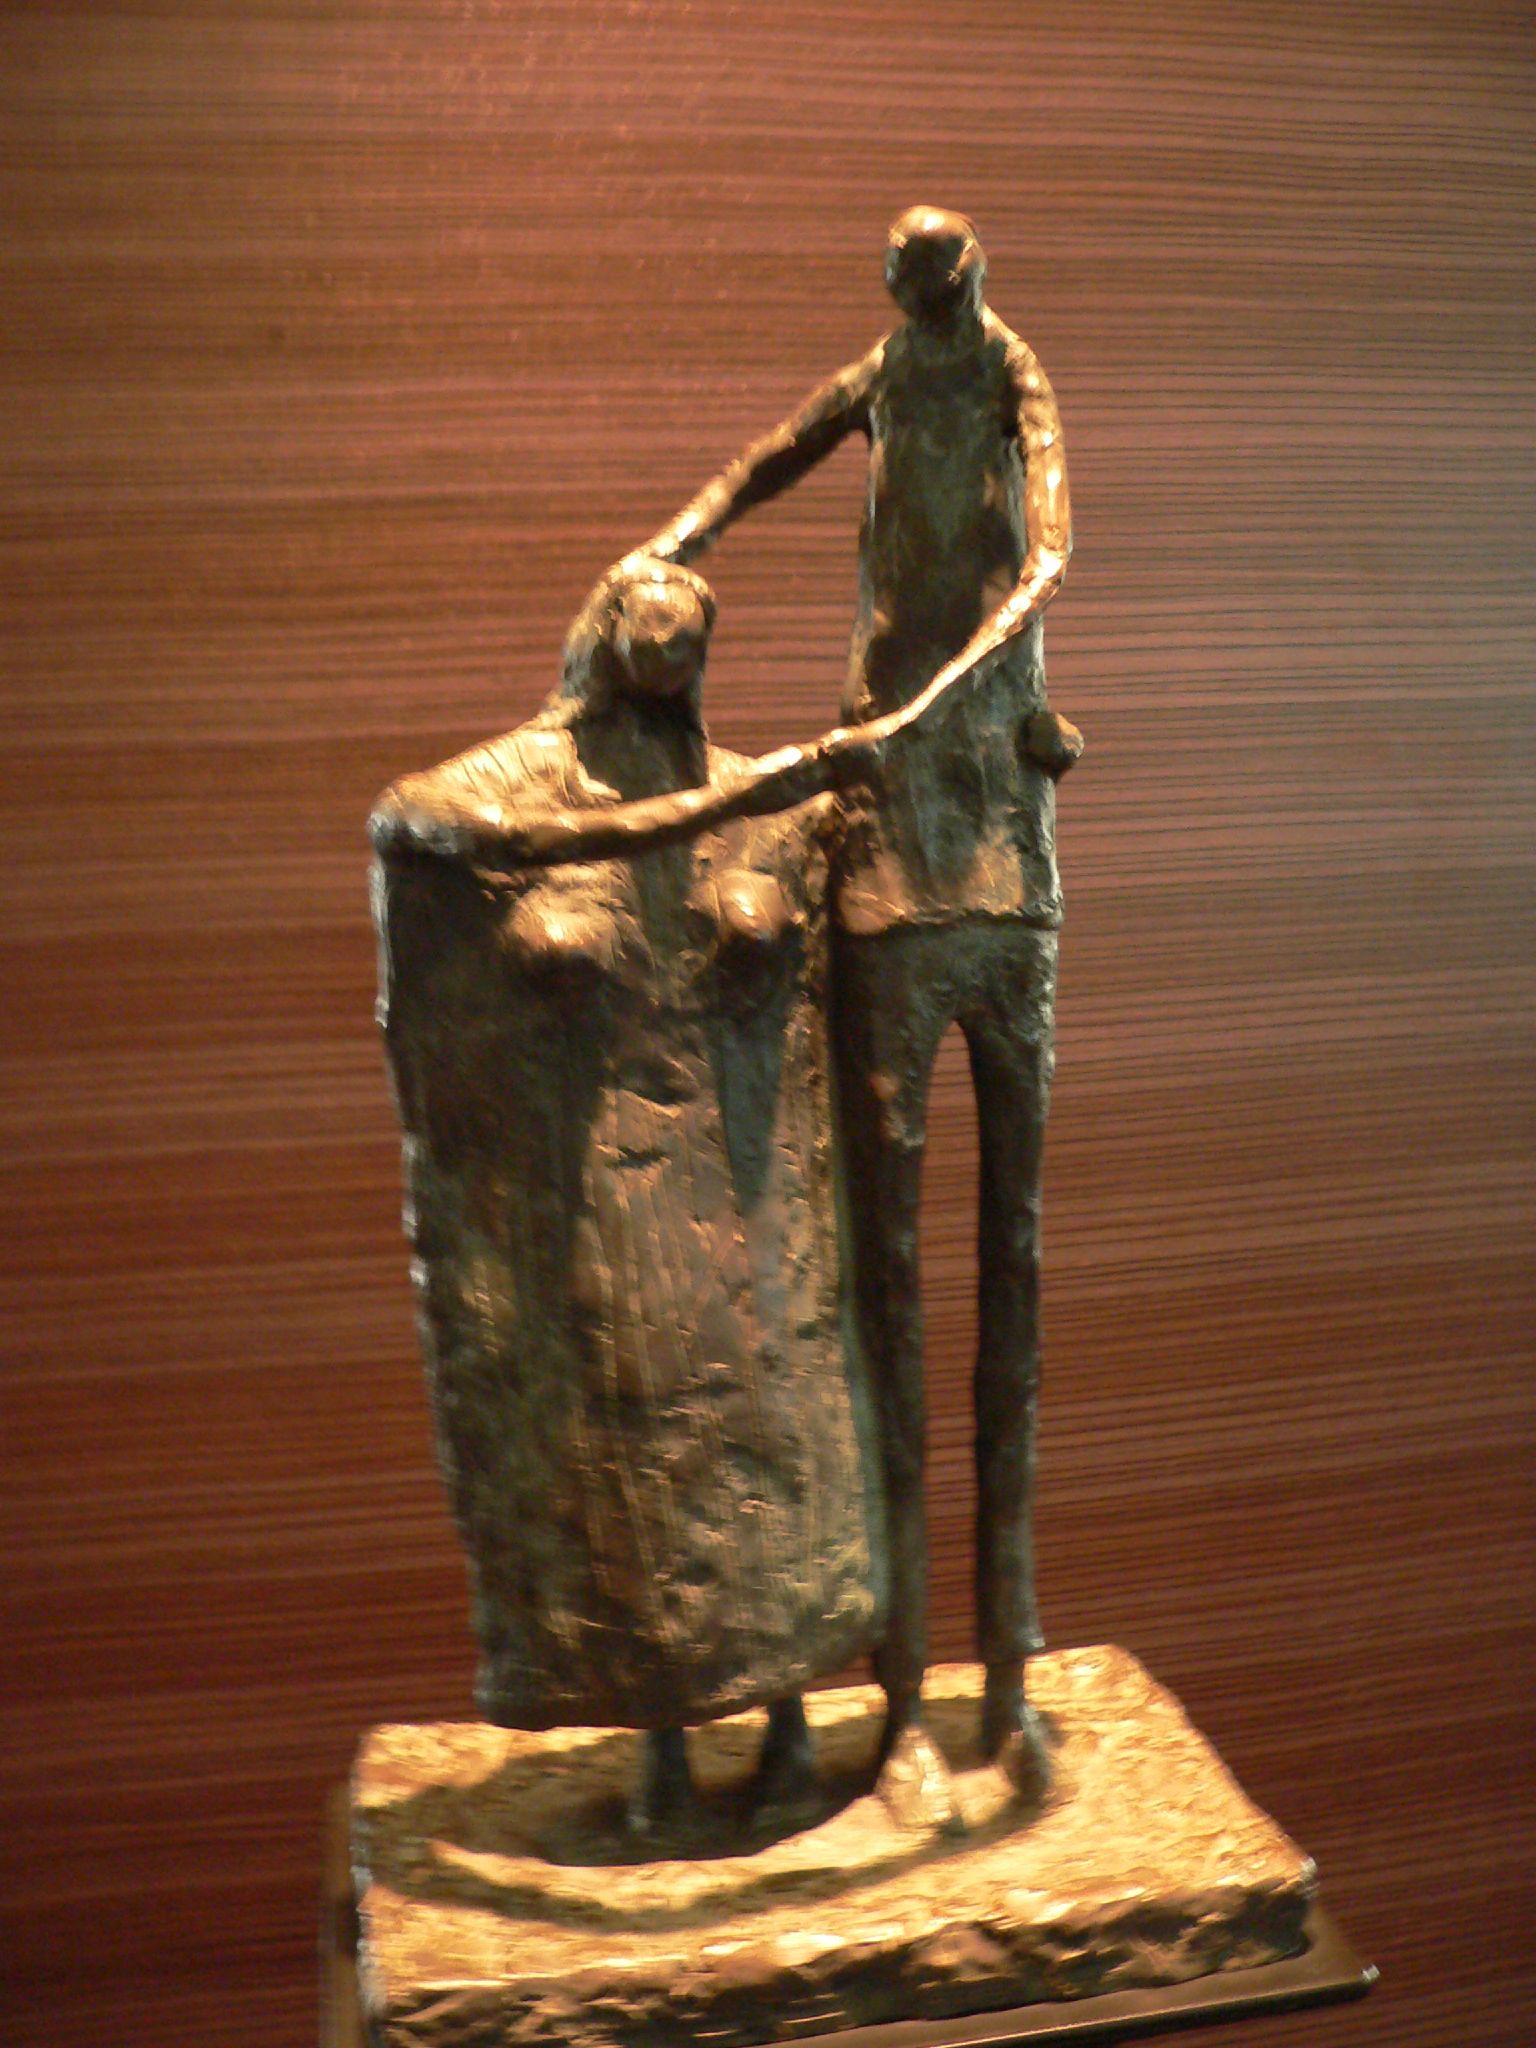 a statue of two men sitting in a trash can